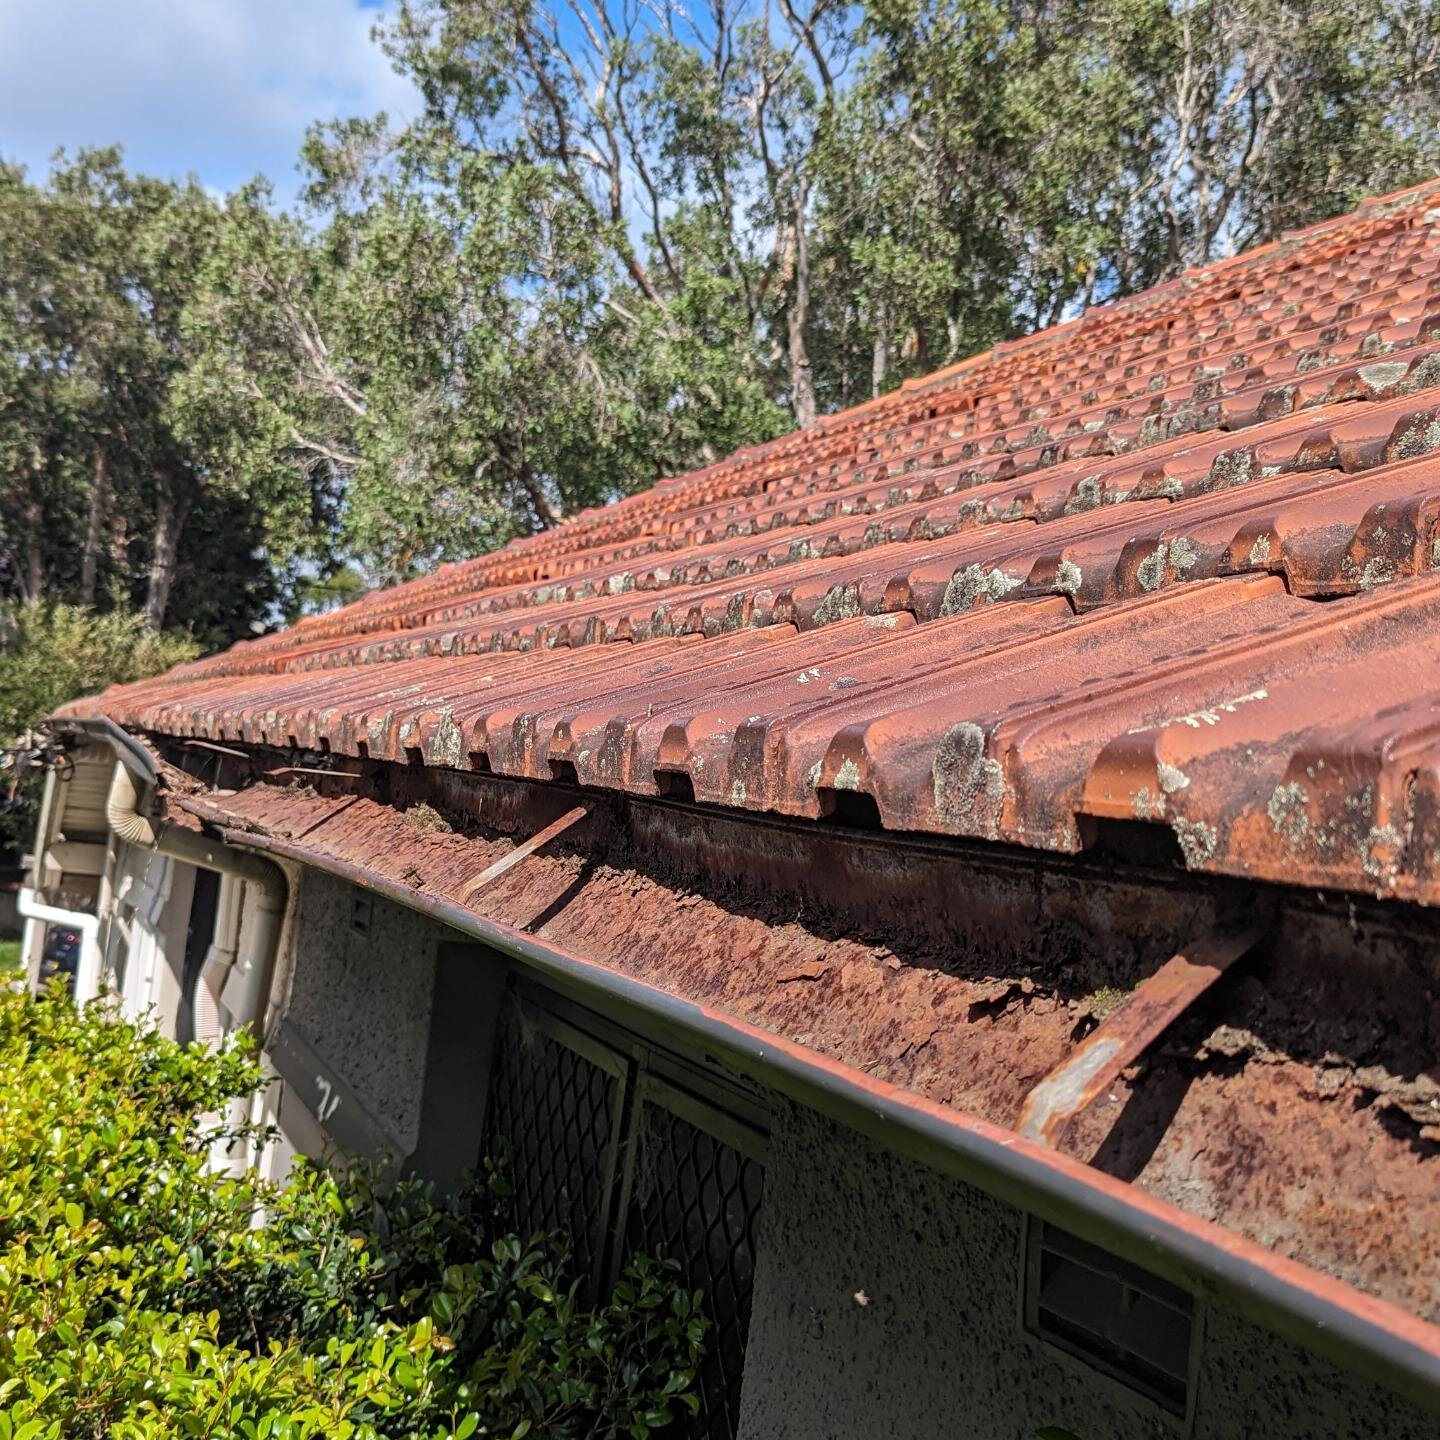 BEFORE &amp; AFTER - Rusted out gutter and brackets replaced with brand new colourbond guttering. Ready for the next rain!

#guttercleaning #guttercleaningservices #guttermaintenance  #gutterpromaintenance #gutterprotection